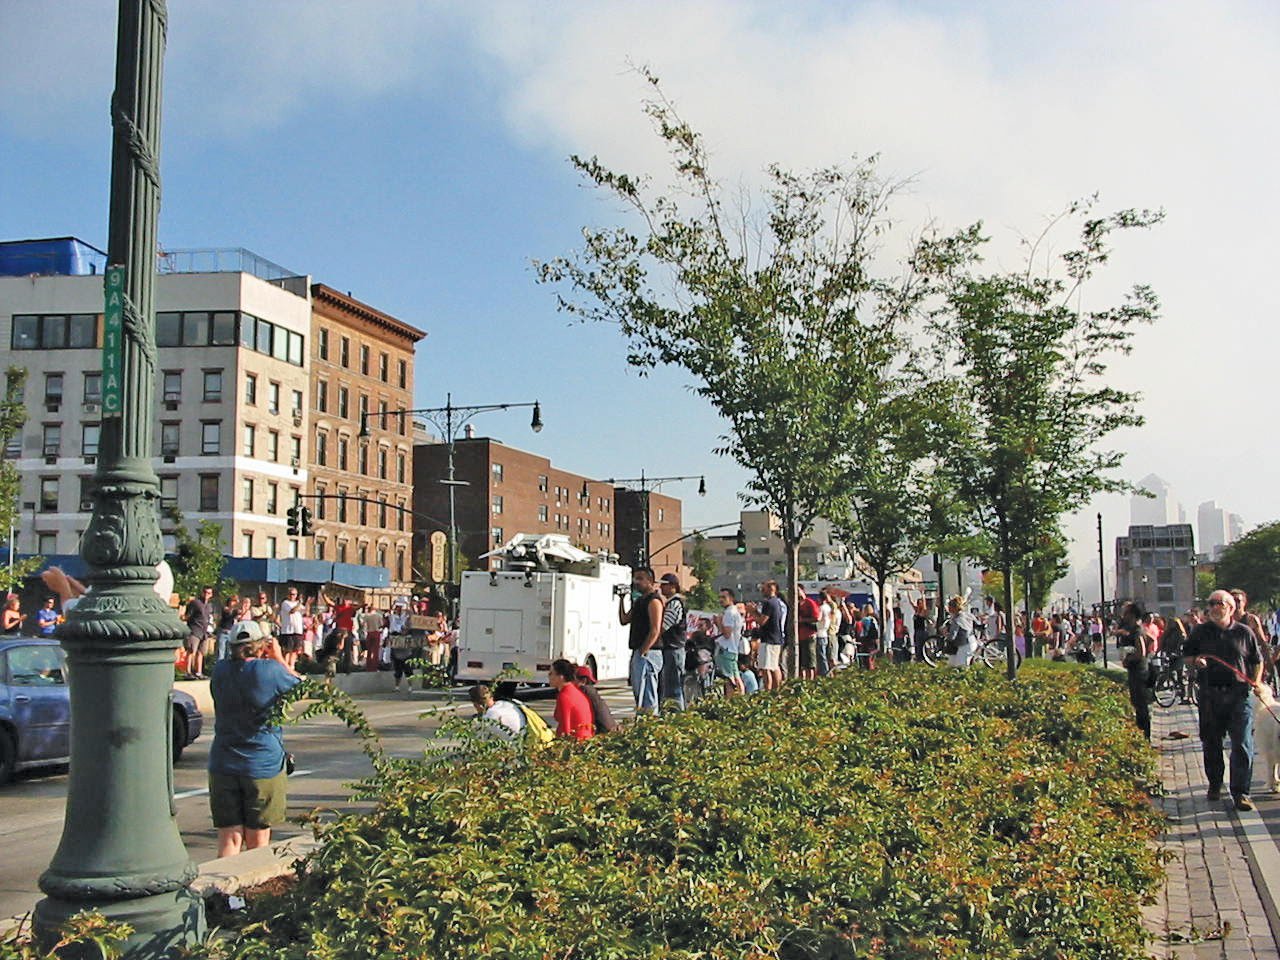 People gather on the West Side Highway near the World Trade Center on Sept. 11, 2001.